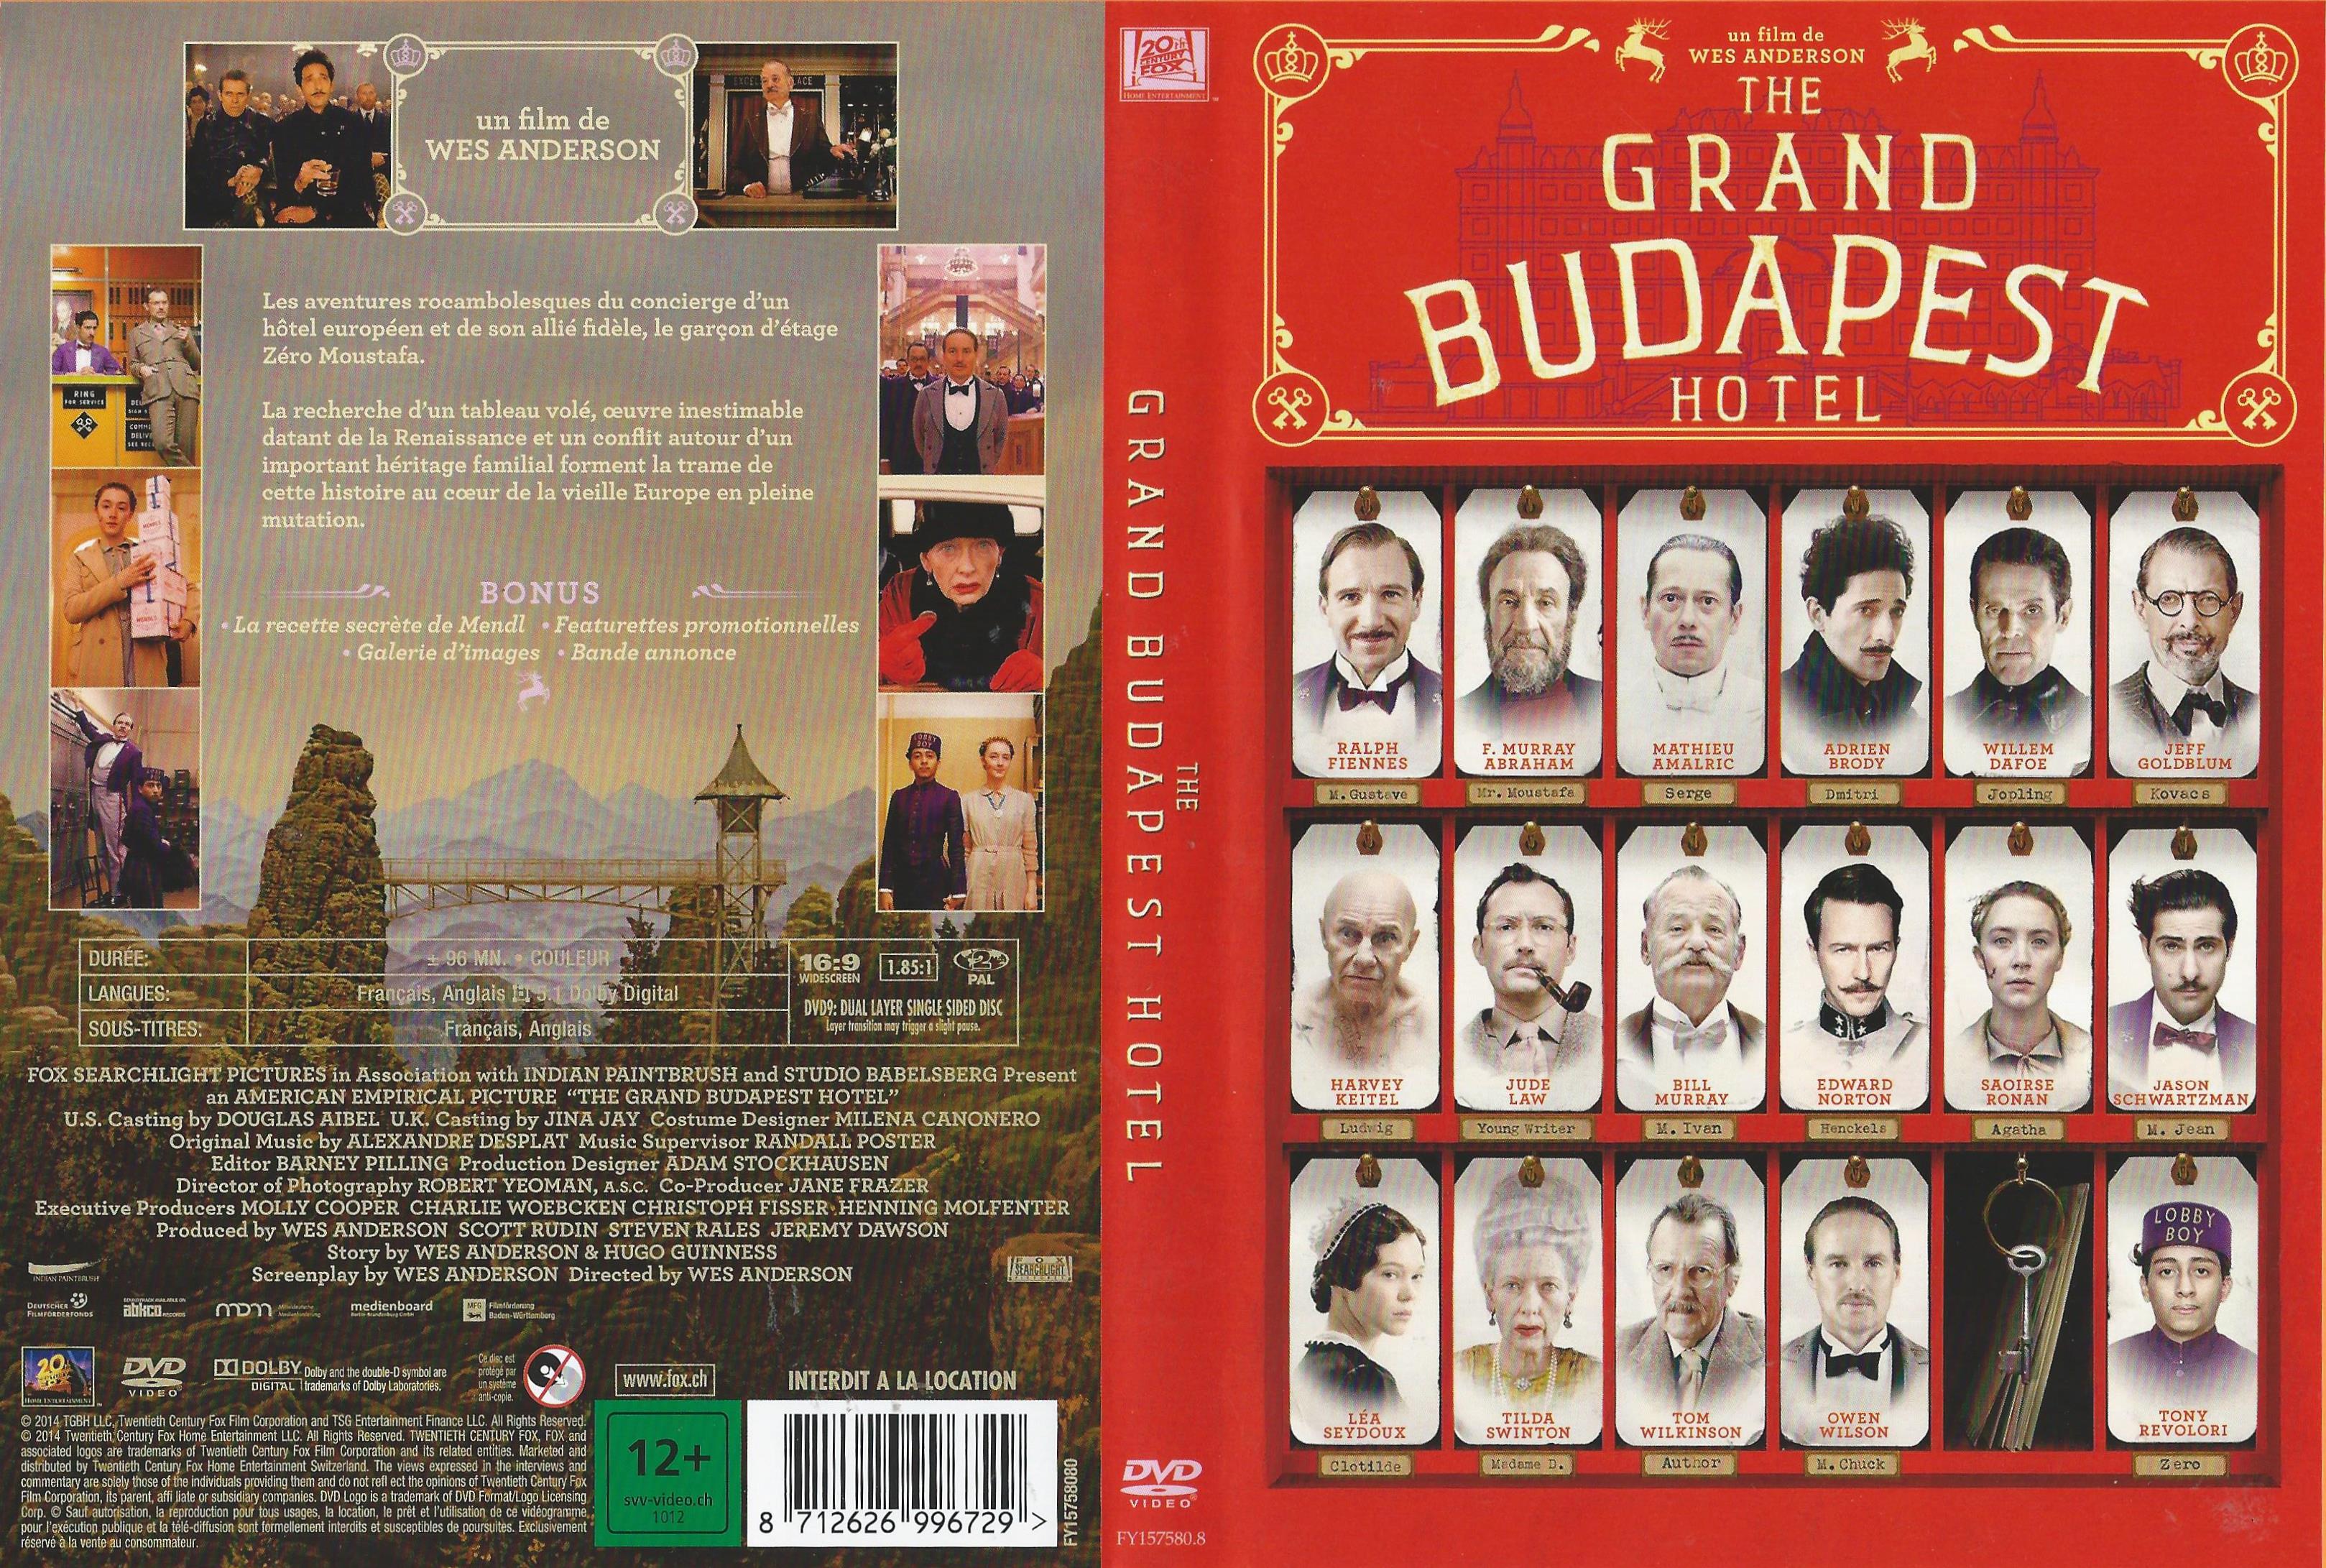 Jaquette DVD The Grand Budapest Hotel v2